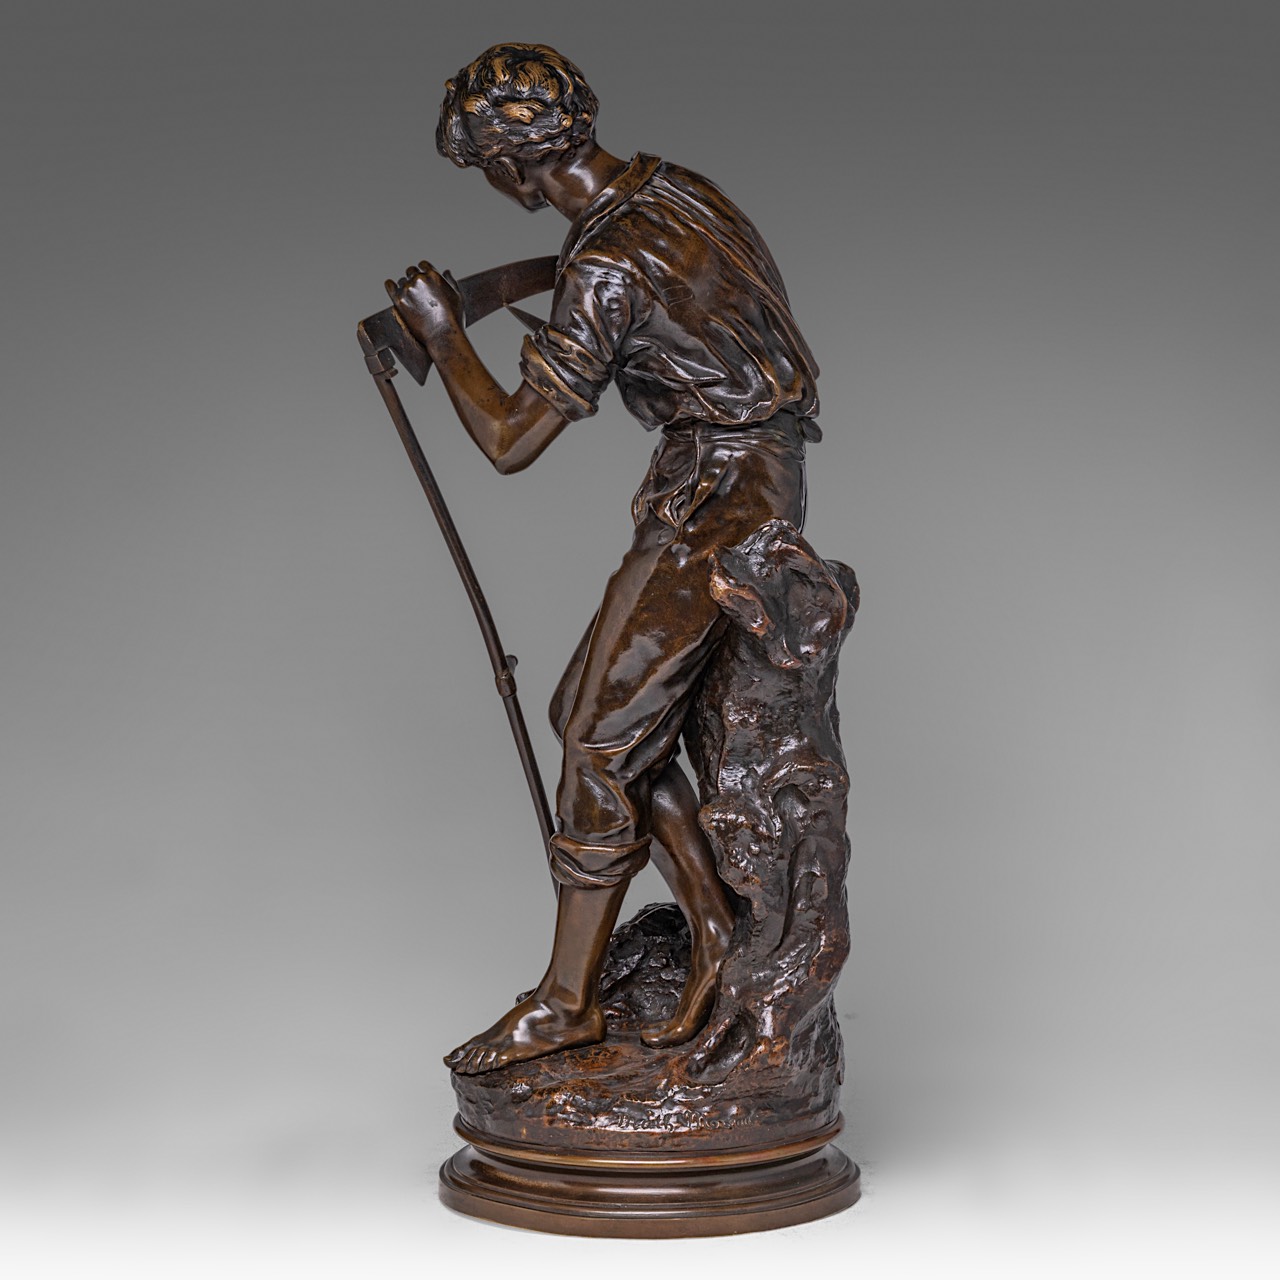 Mathurin Moreau (1822-1912), boy with scythe, patinated bronze, H 62 cm - Image 3 of 7